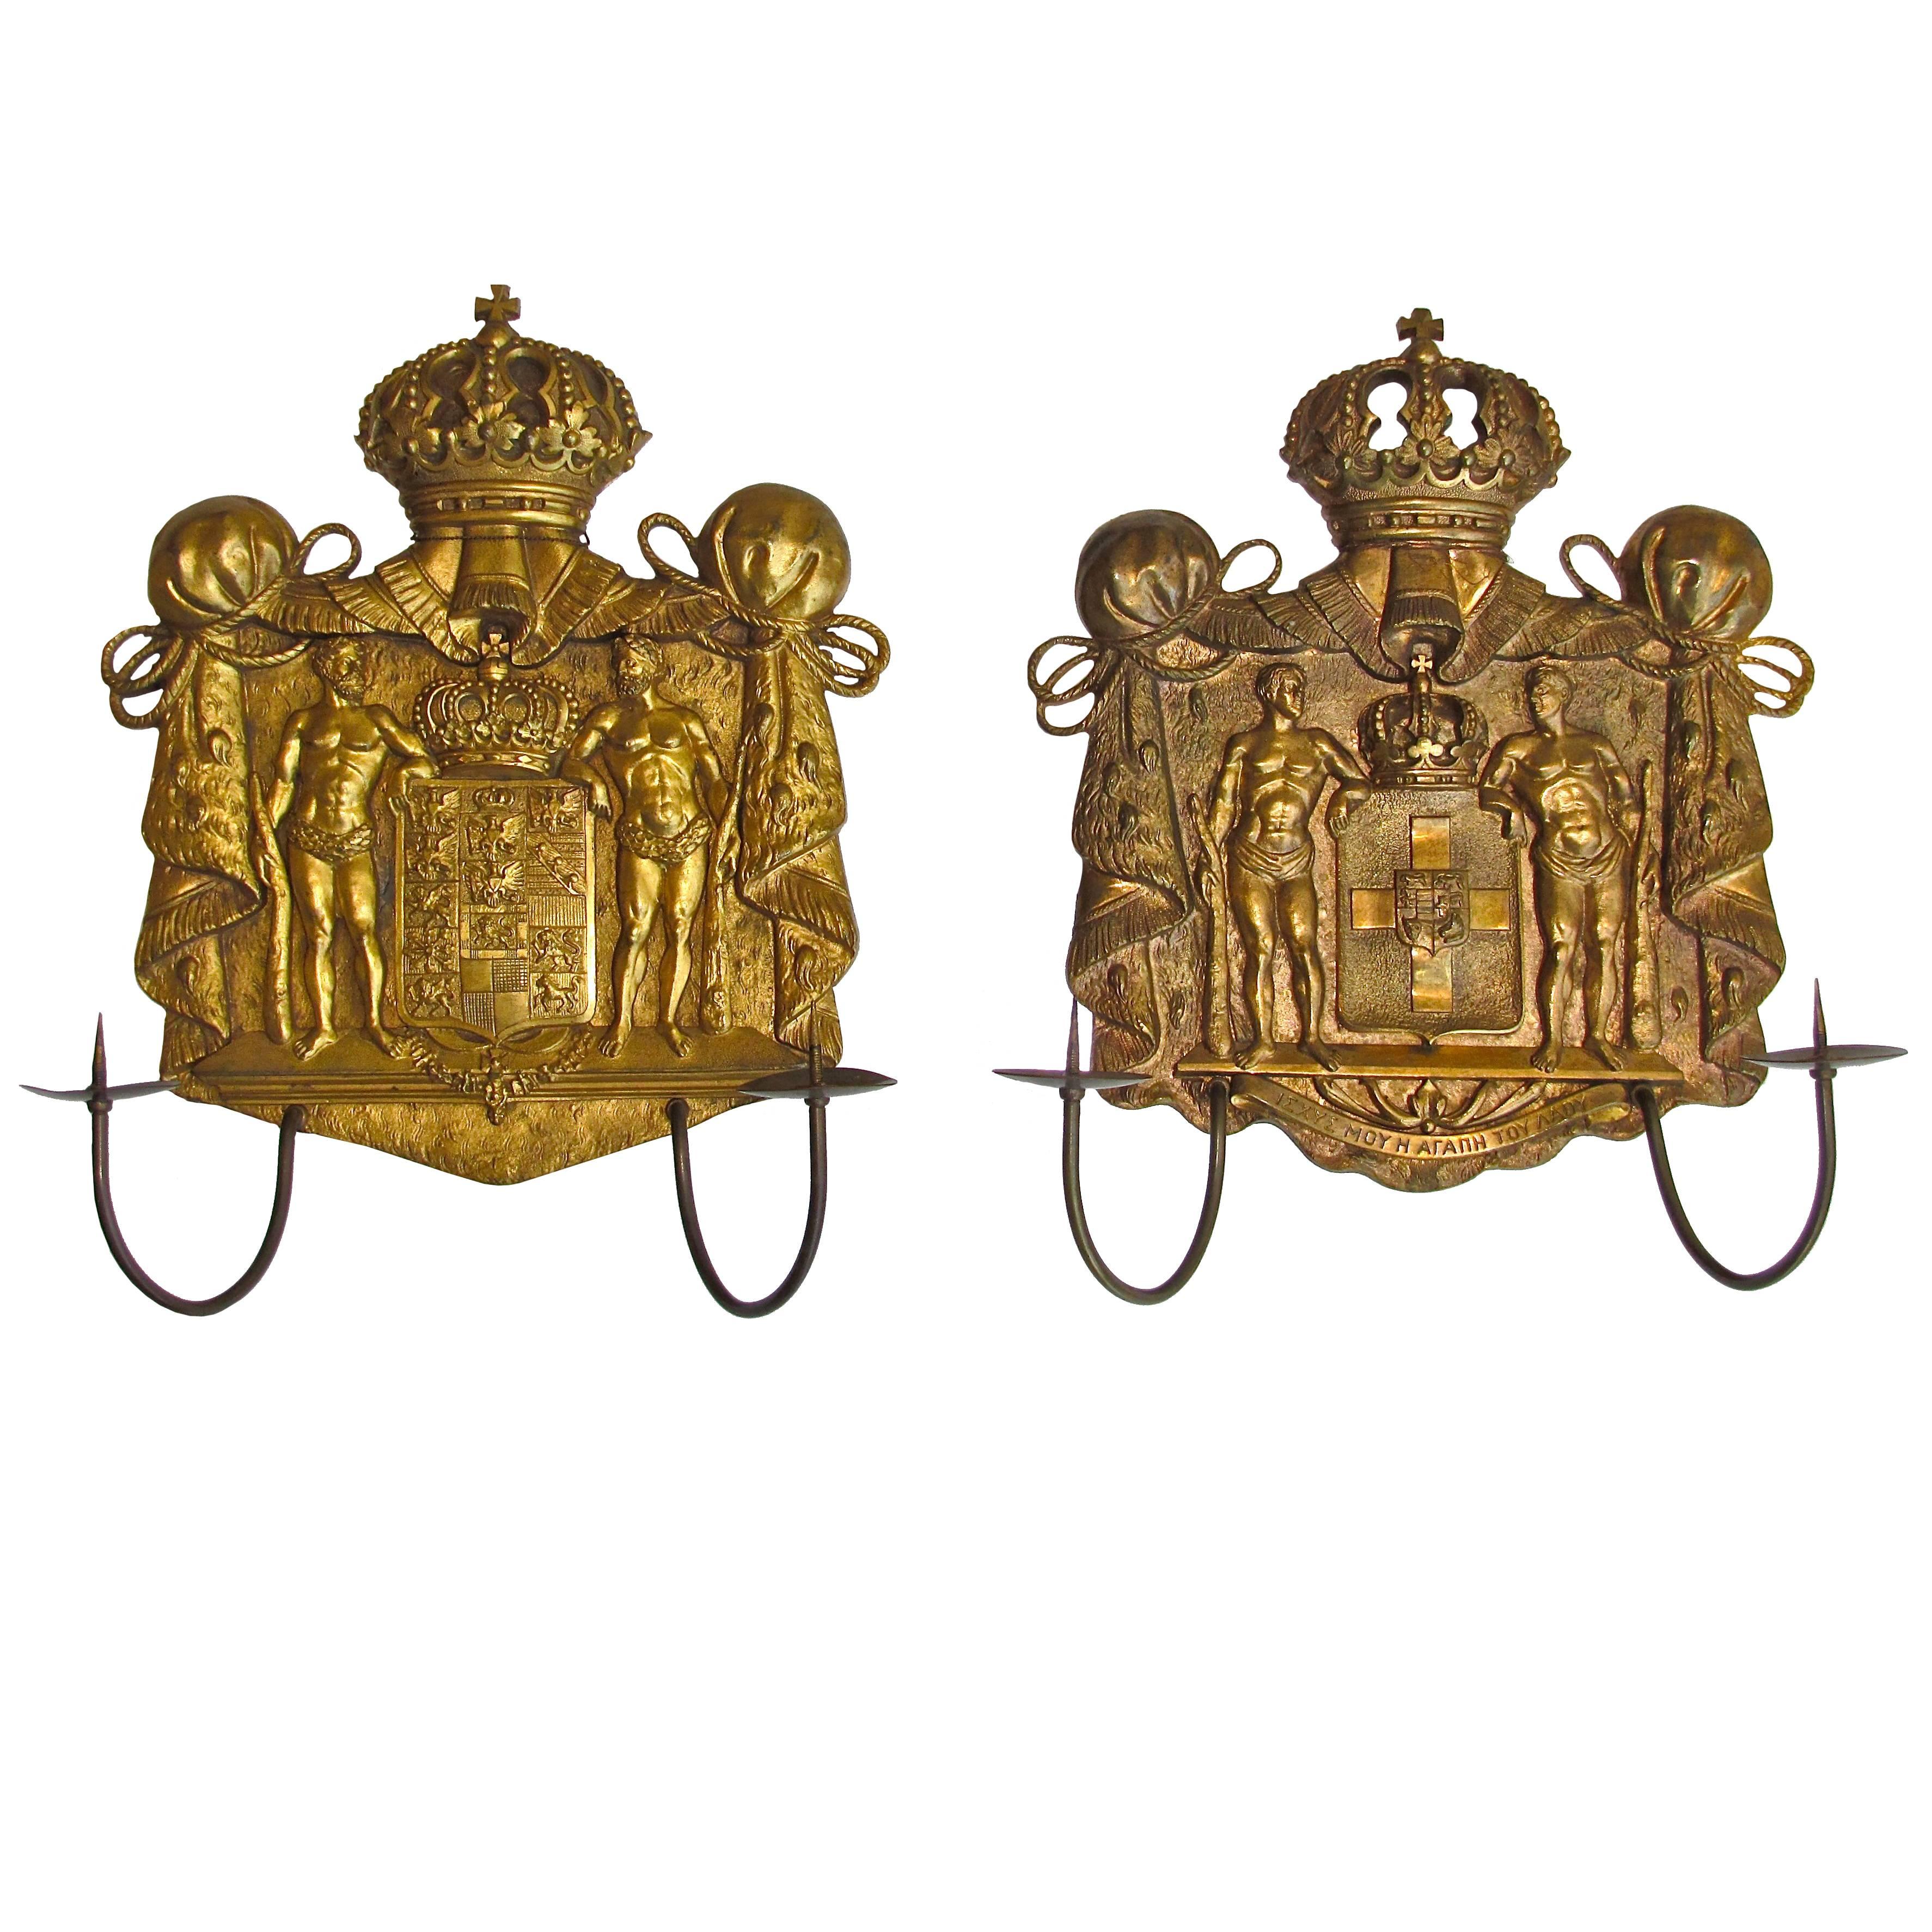 Pair of Gilt Bronze Neo Classic Candle Wall Sconces